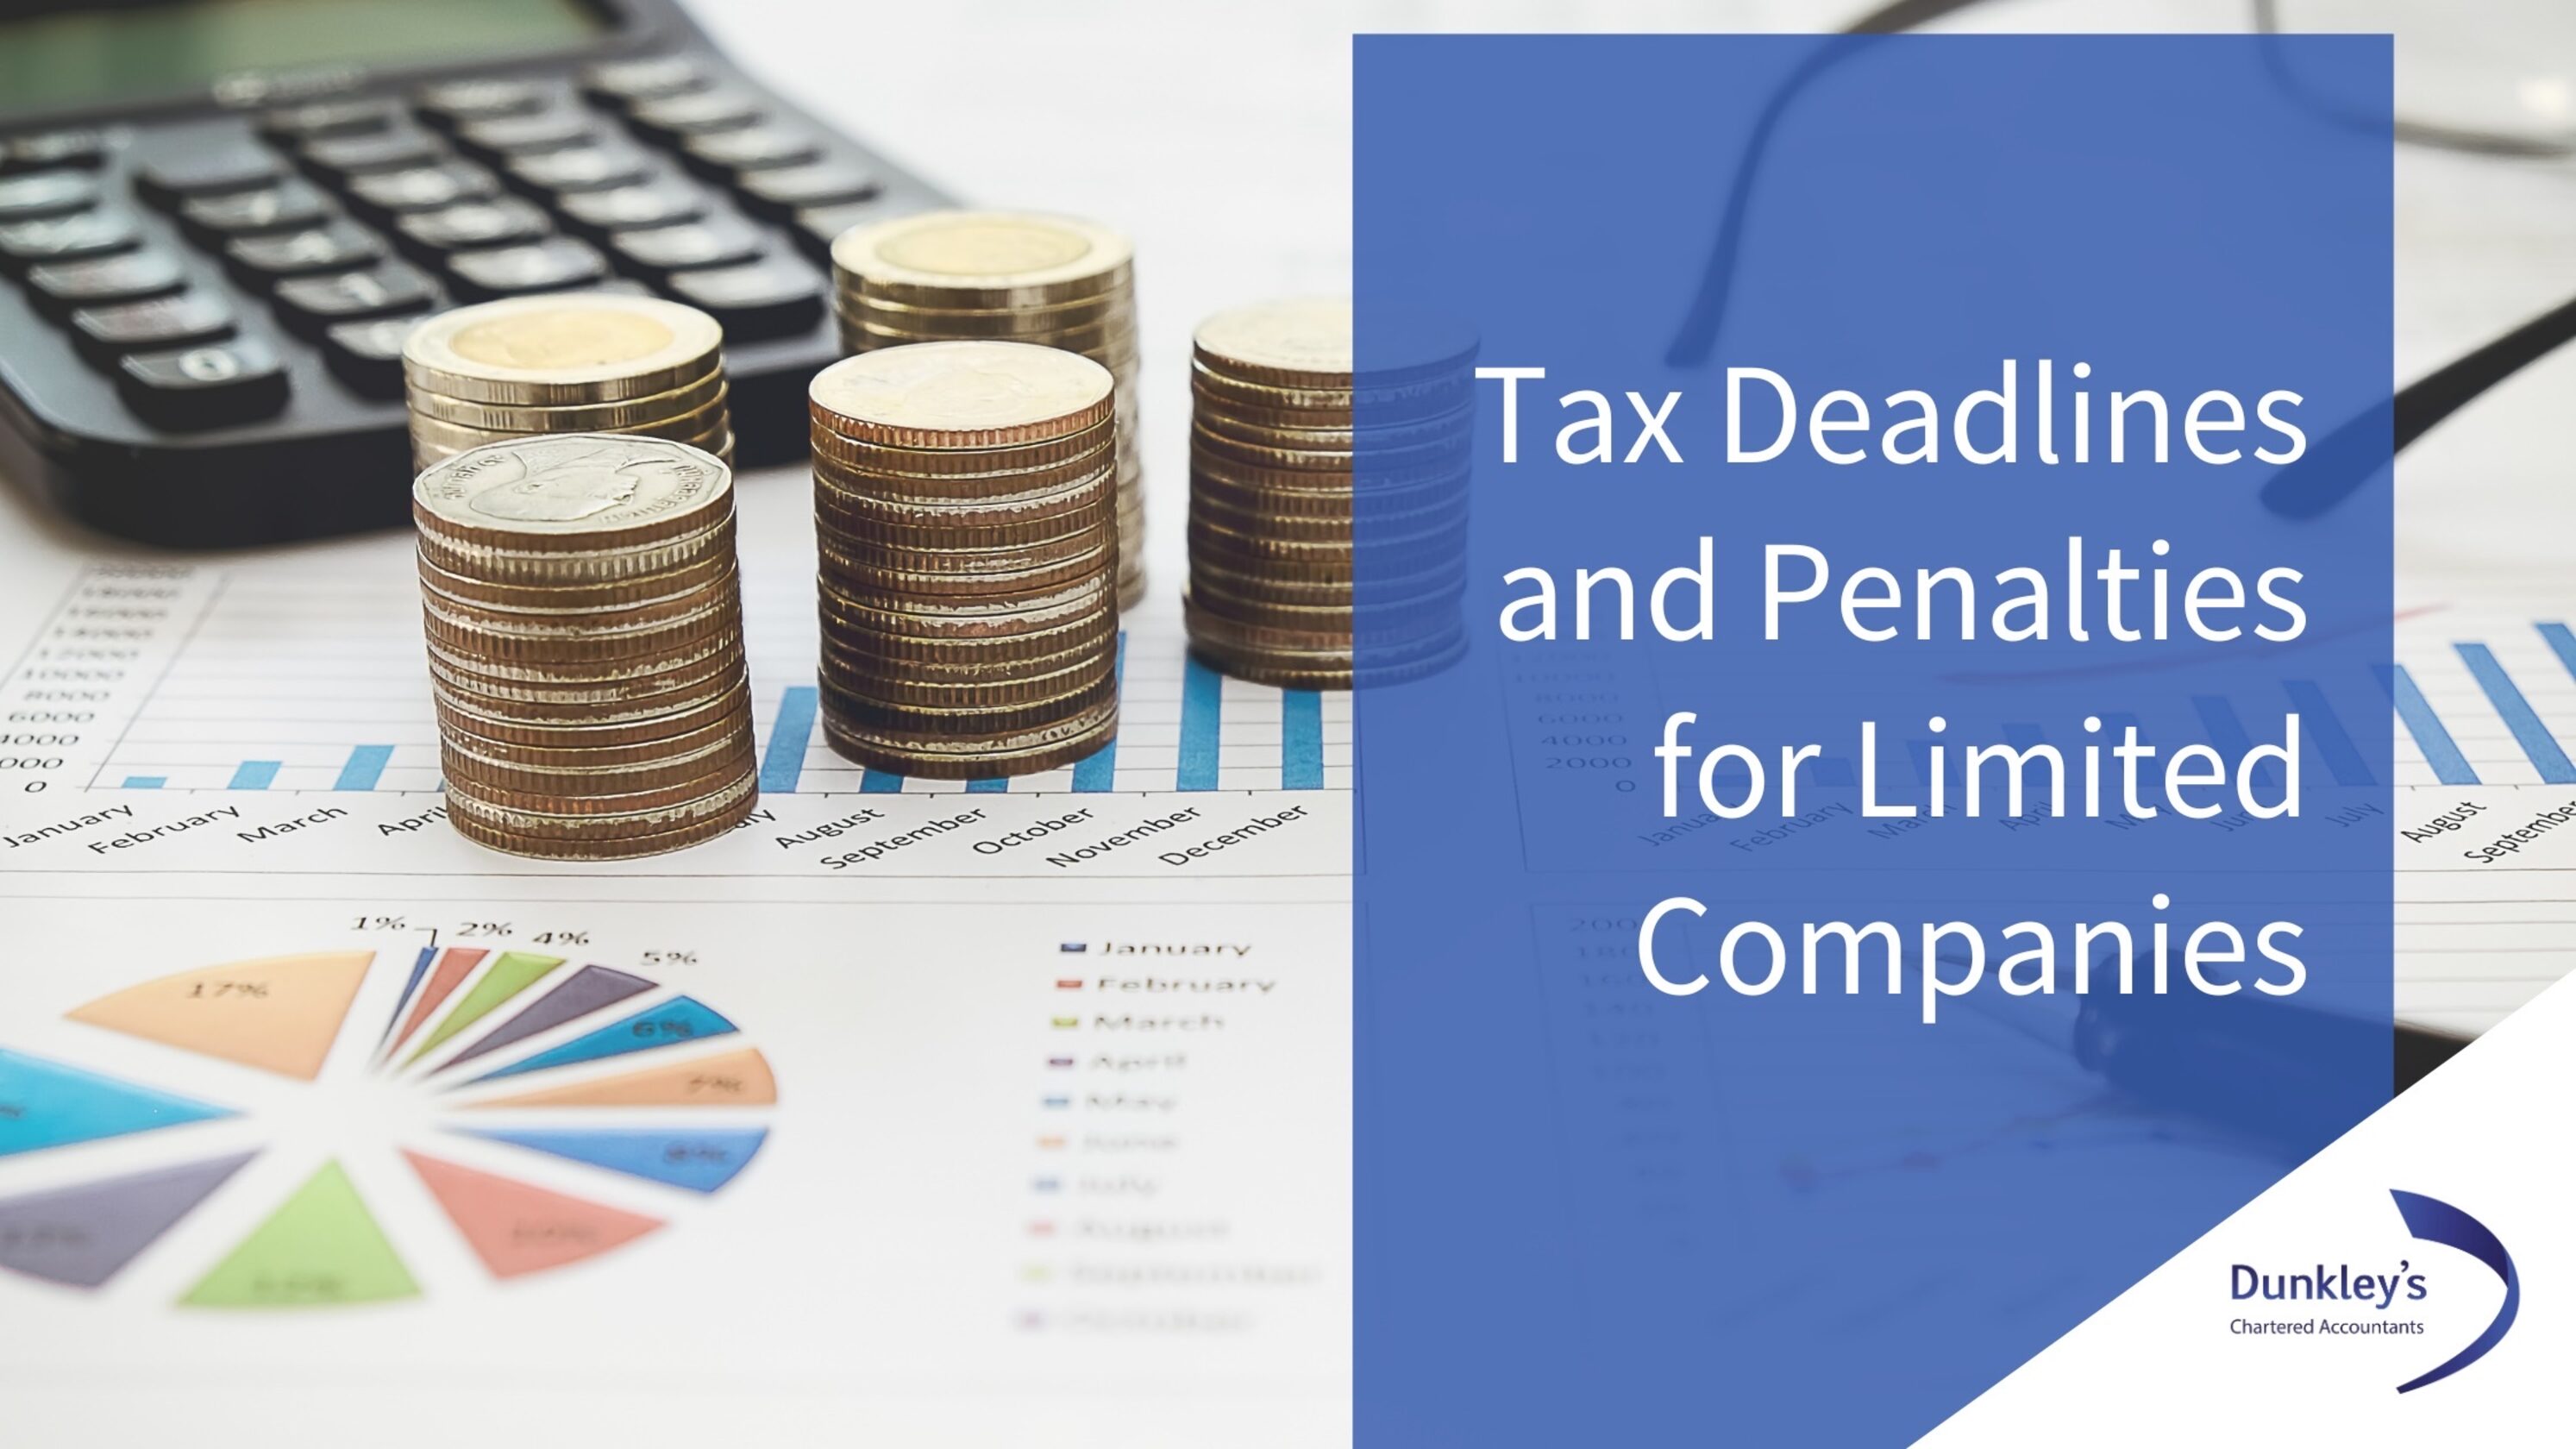 Tax Deadlines and Penalties for Limited Companies